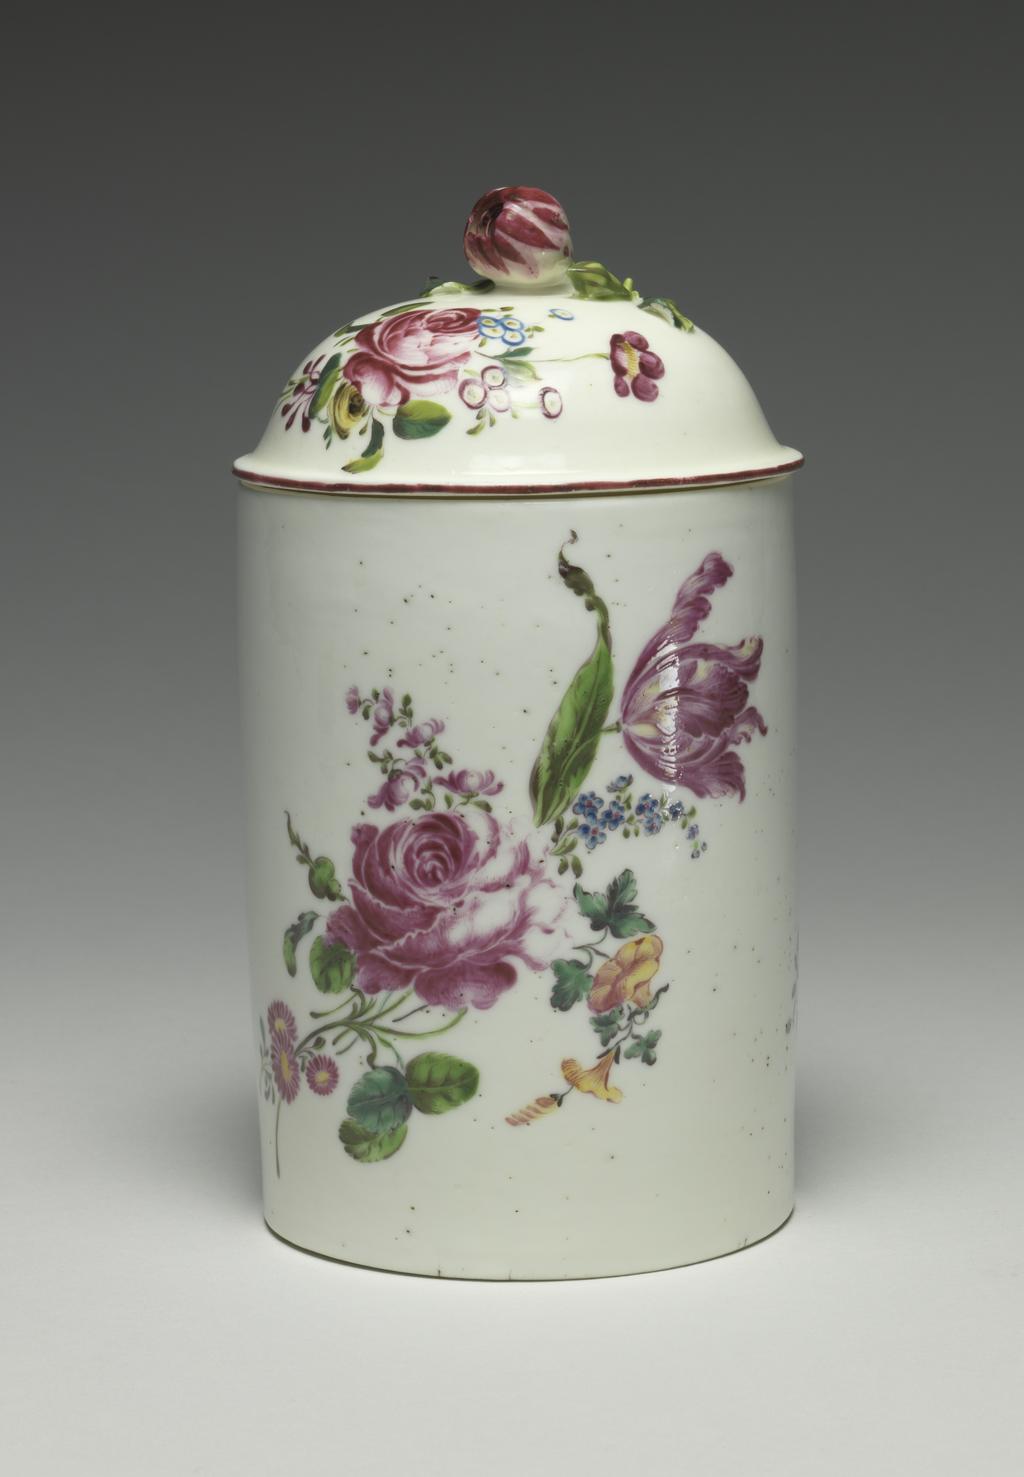 An image of Tobacco jar and cover. The cover may be a 'marriage'. Mennecy Porcelain Manufactory. Cylindrical with recessed base, and domed cover, with an unglazed flange which fits inside the jar, and an applied knob in the shape of a rose bud, a smaller undeveloped bud, and three leaves on a stalk. The jar is decorated with one large floral spray comprising a tulip, a rose, forget-me-knots, convolvulus and pink daisies, and four smaller floral sprays. The cover is decorated with one large and one small floral spray, and has a dark puce band round the outer edge. Soft-paste porcelain, thrown, lead-glazed, and painted overglaze in blue, green, yellow, and rose-pink enamels, height, whole, 16.4 cm, height, jar, 11.9 cm, diameter, jar, 8.7 cm, diameter, cover, 9 cm, circa 1750- 1760. Rococo.